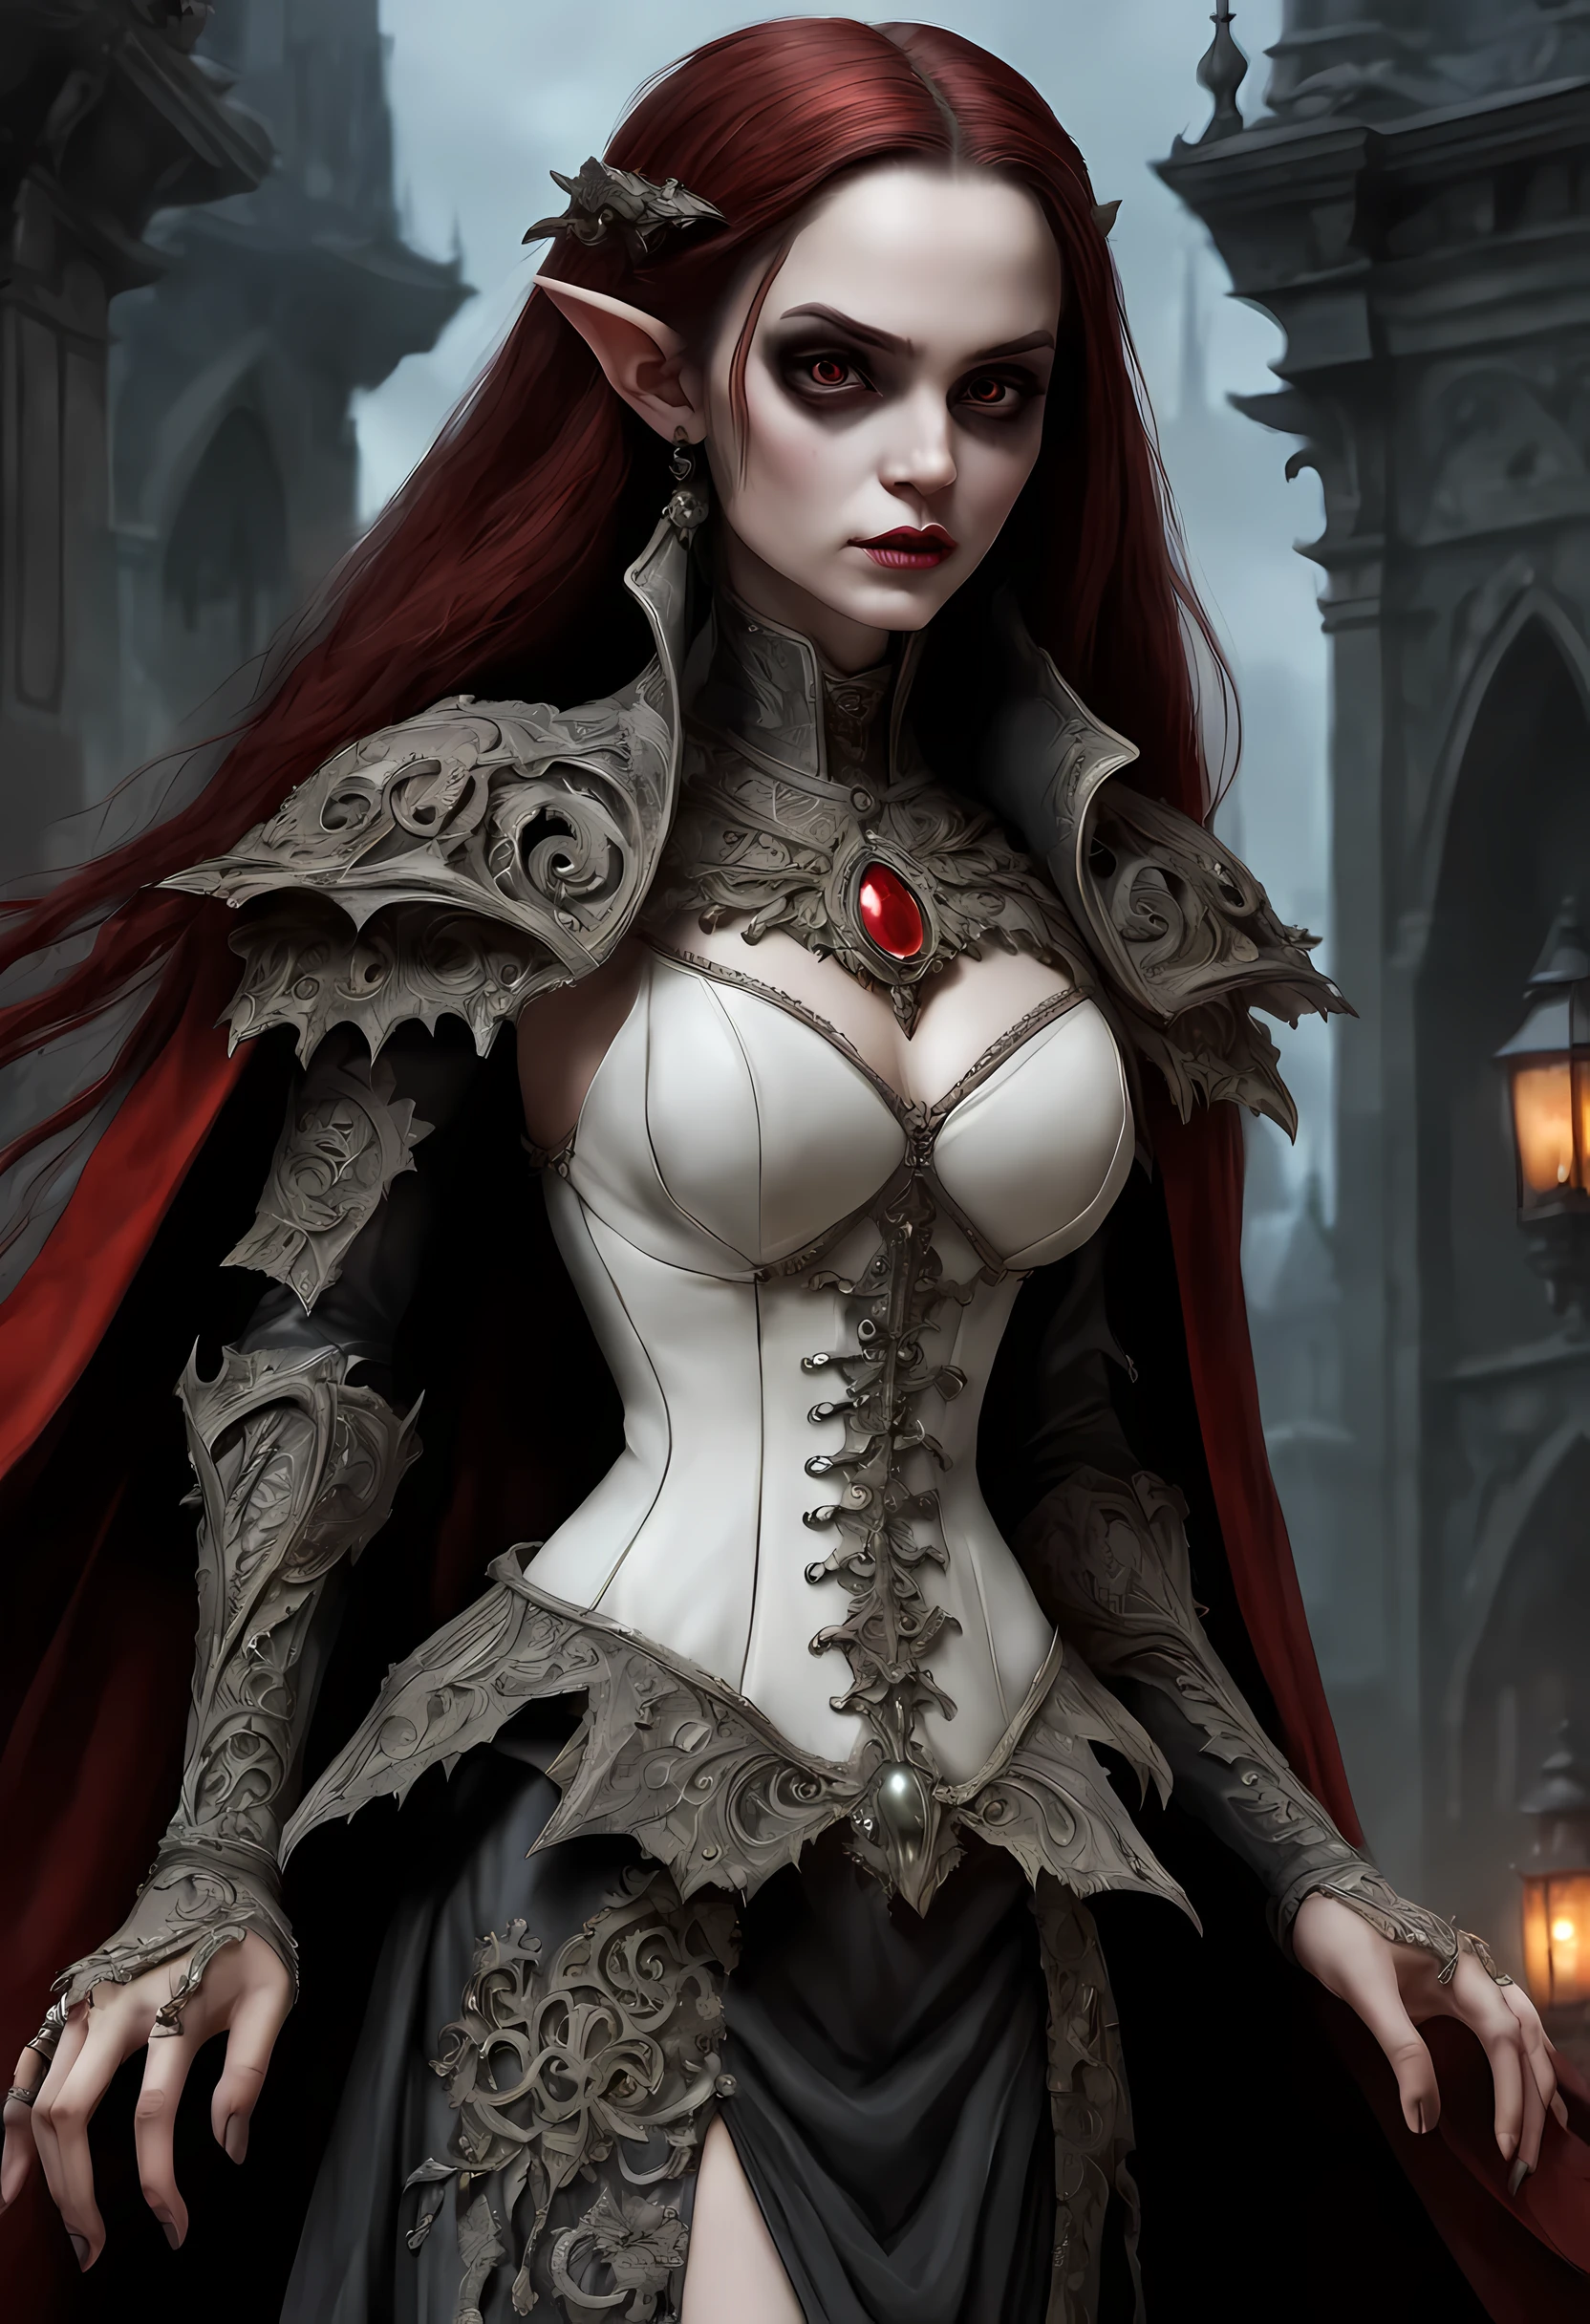 arafed, dark fantasy art, gothic art, (masterpiece:1.5), full body best details, highly detailed, best quality, highres, NeroV2, full body portrait of a vampire, elf (Masterpiece, best quality, ultra feminine: 1.5)  with a long curvy hair, dark color hair, red eyes (fantasy art, Masterpiece, best quality: 1.3), ((beautiful delicate face)), Ultra Detailed Face (intricate details, fantasy art, Masterpiece, best quality: 1.5), [visible vampiric fangs] (intricate details, fantasy art, Masterpiece, best quality: 1.5), [anatomically correct] red cloak, flowing cloak (intense details, fantasy art, Masterpiece, best quality: 1.3), wearing an intricate leather [white] dress (intricate details, gothic art, Masterpiece, best quality: 1.5), high heeled boots, blood dripping on lips, urban background (intense details, beat details), fantasy, at night light, natural ,moon light, soft moon light, moon rays, clouds, gothic atmosphere, gothic street background, bats flying in background, soft light, dynamic light, [[anatomically correct]], high details, best quality, 16k, [ultra detailed], masterpiece, best quality, (extremely detailed), dynamic angle, ultra wide shot, RAW, photorealistic